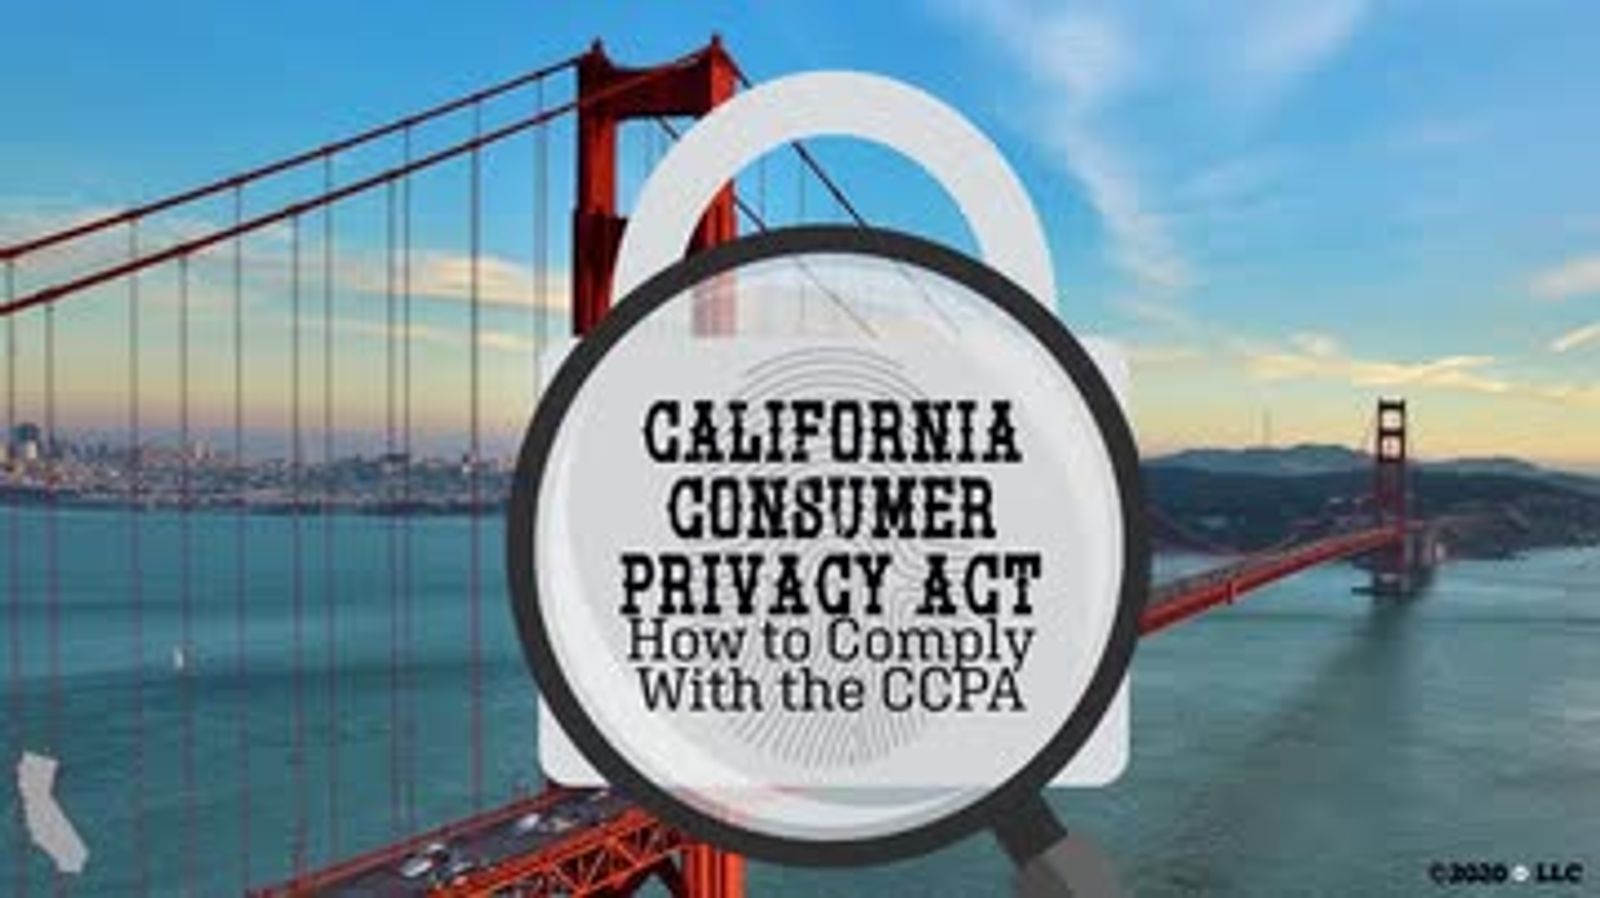 California Consumer Privacy Act: How to Comply With the CCPA